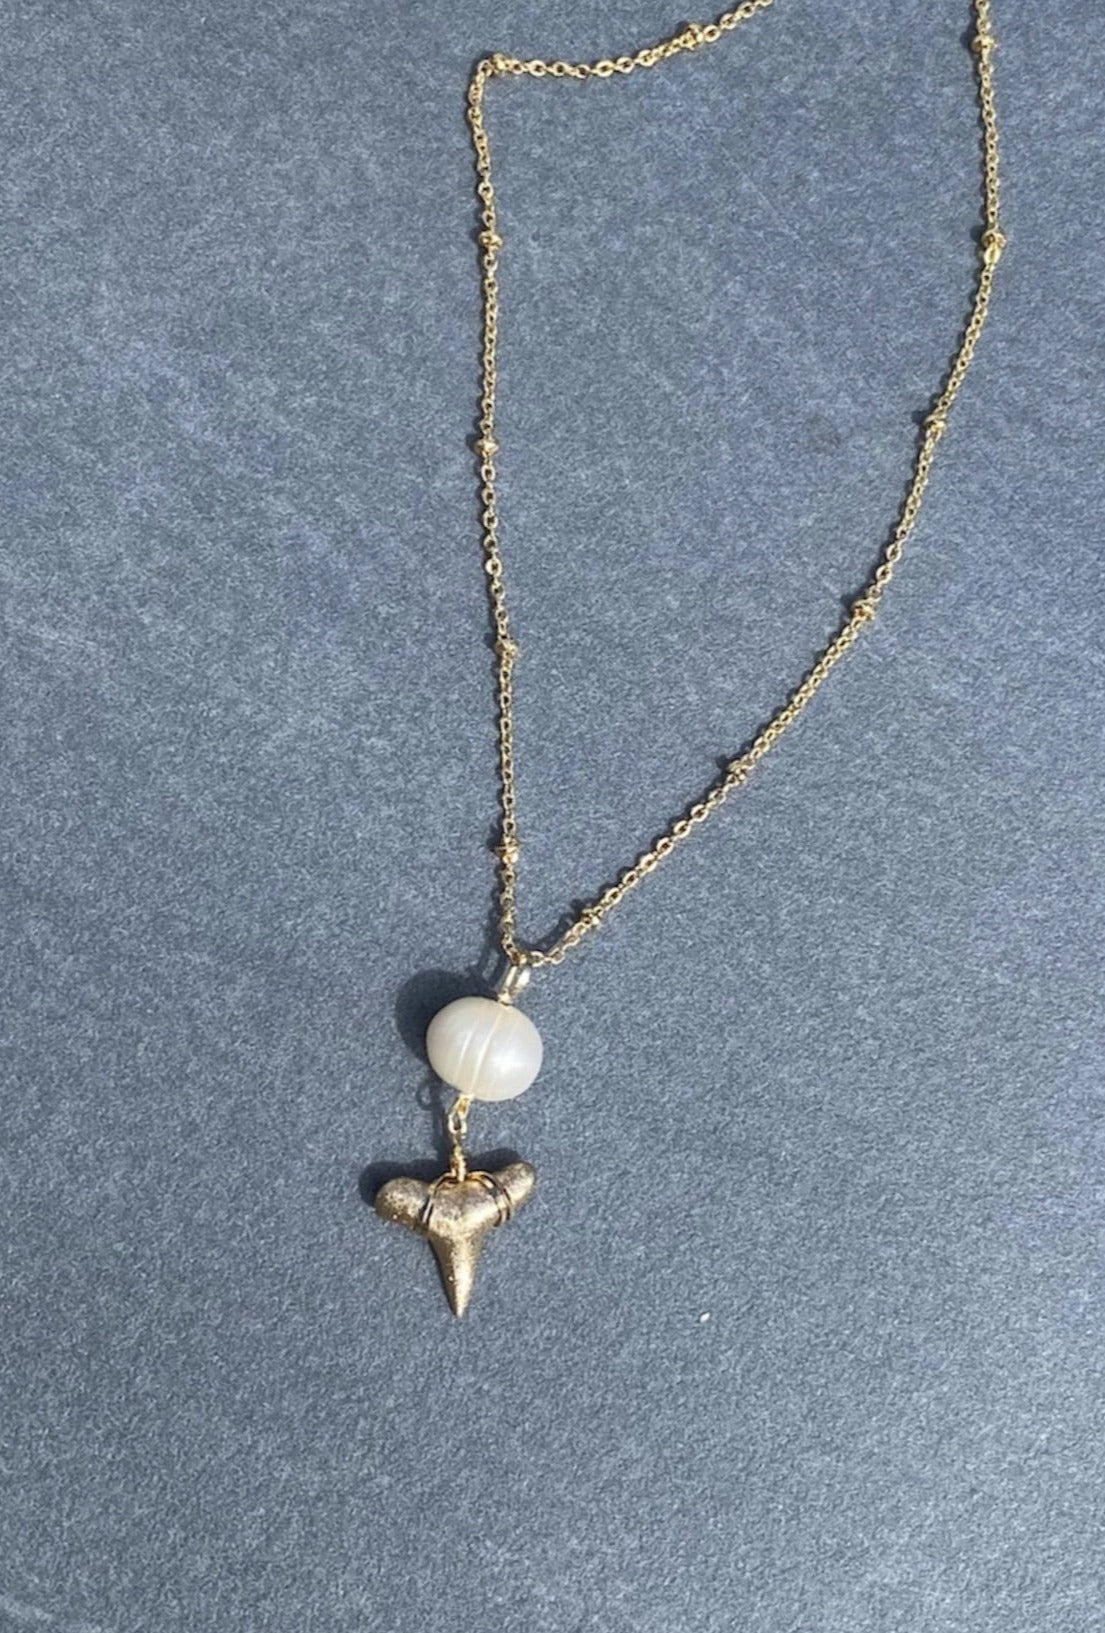 gold shark tooth necklace with pearl - foxy fossils